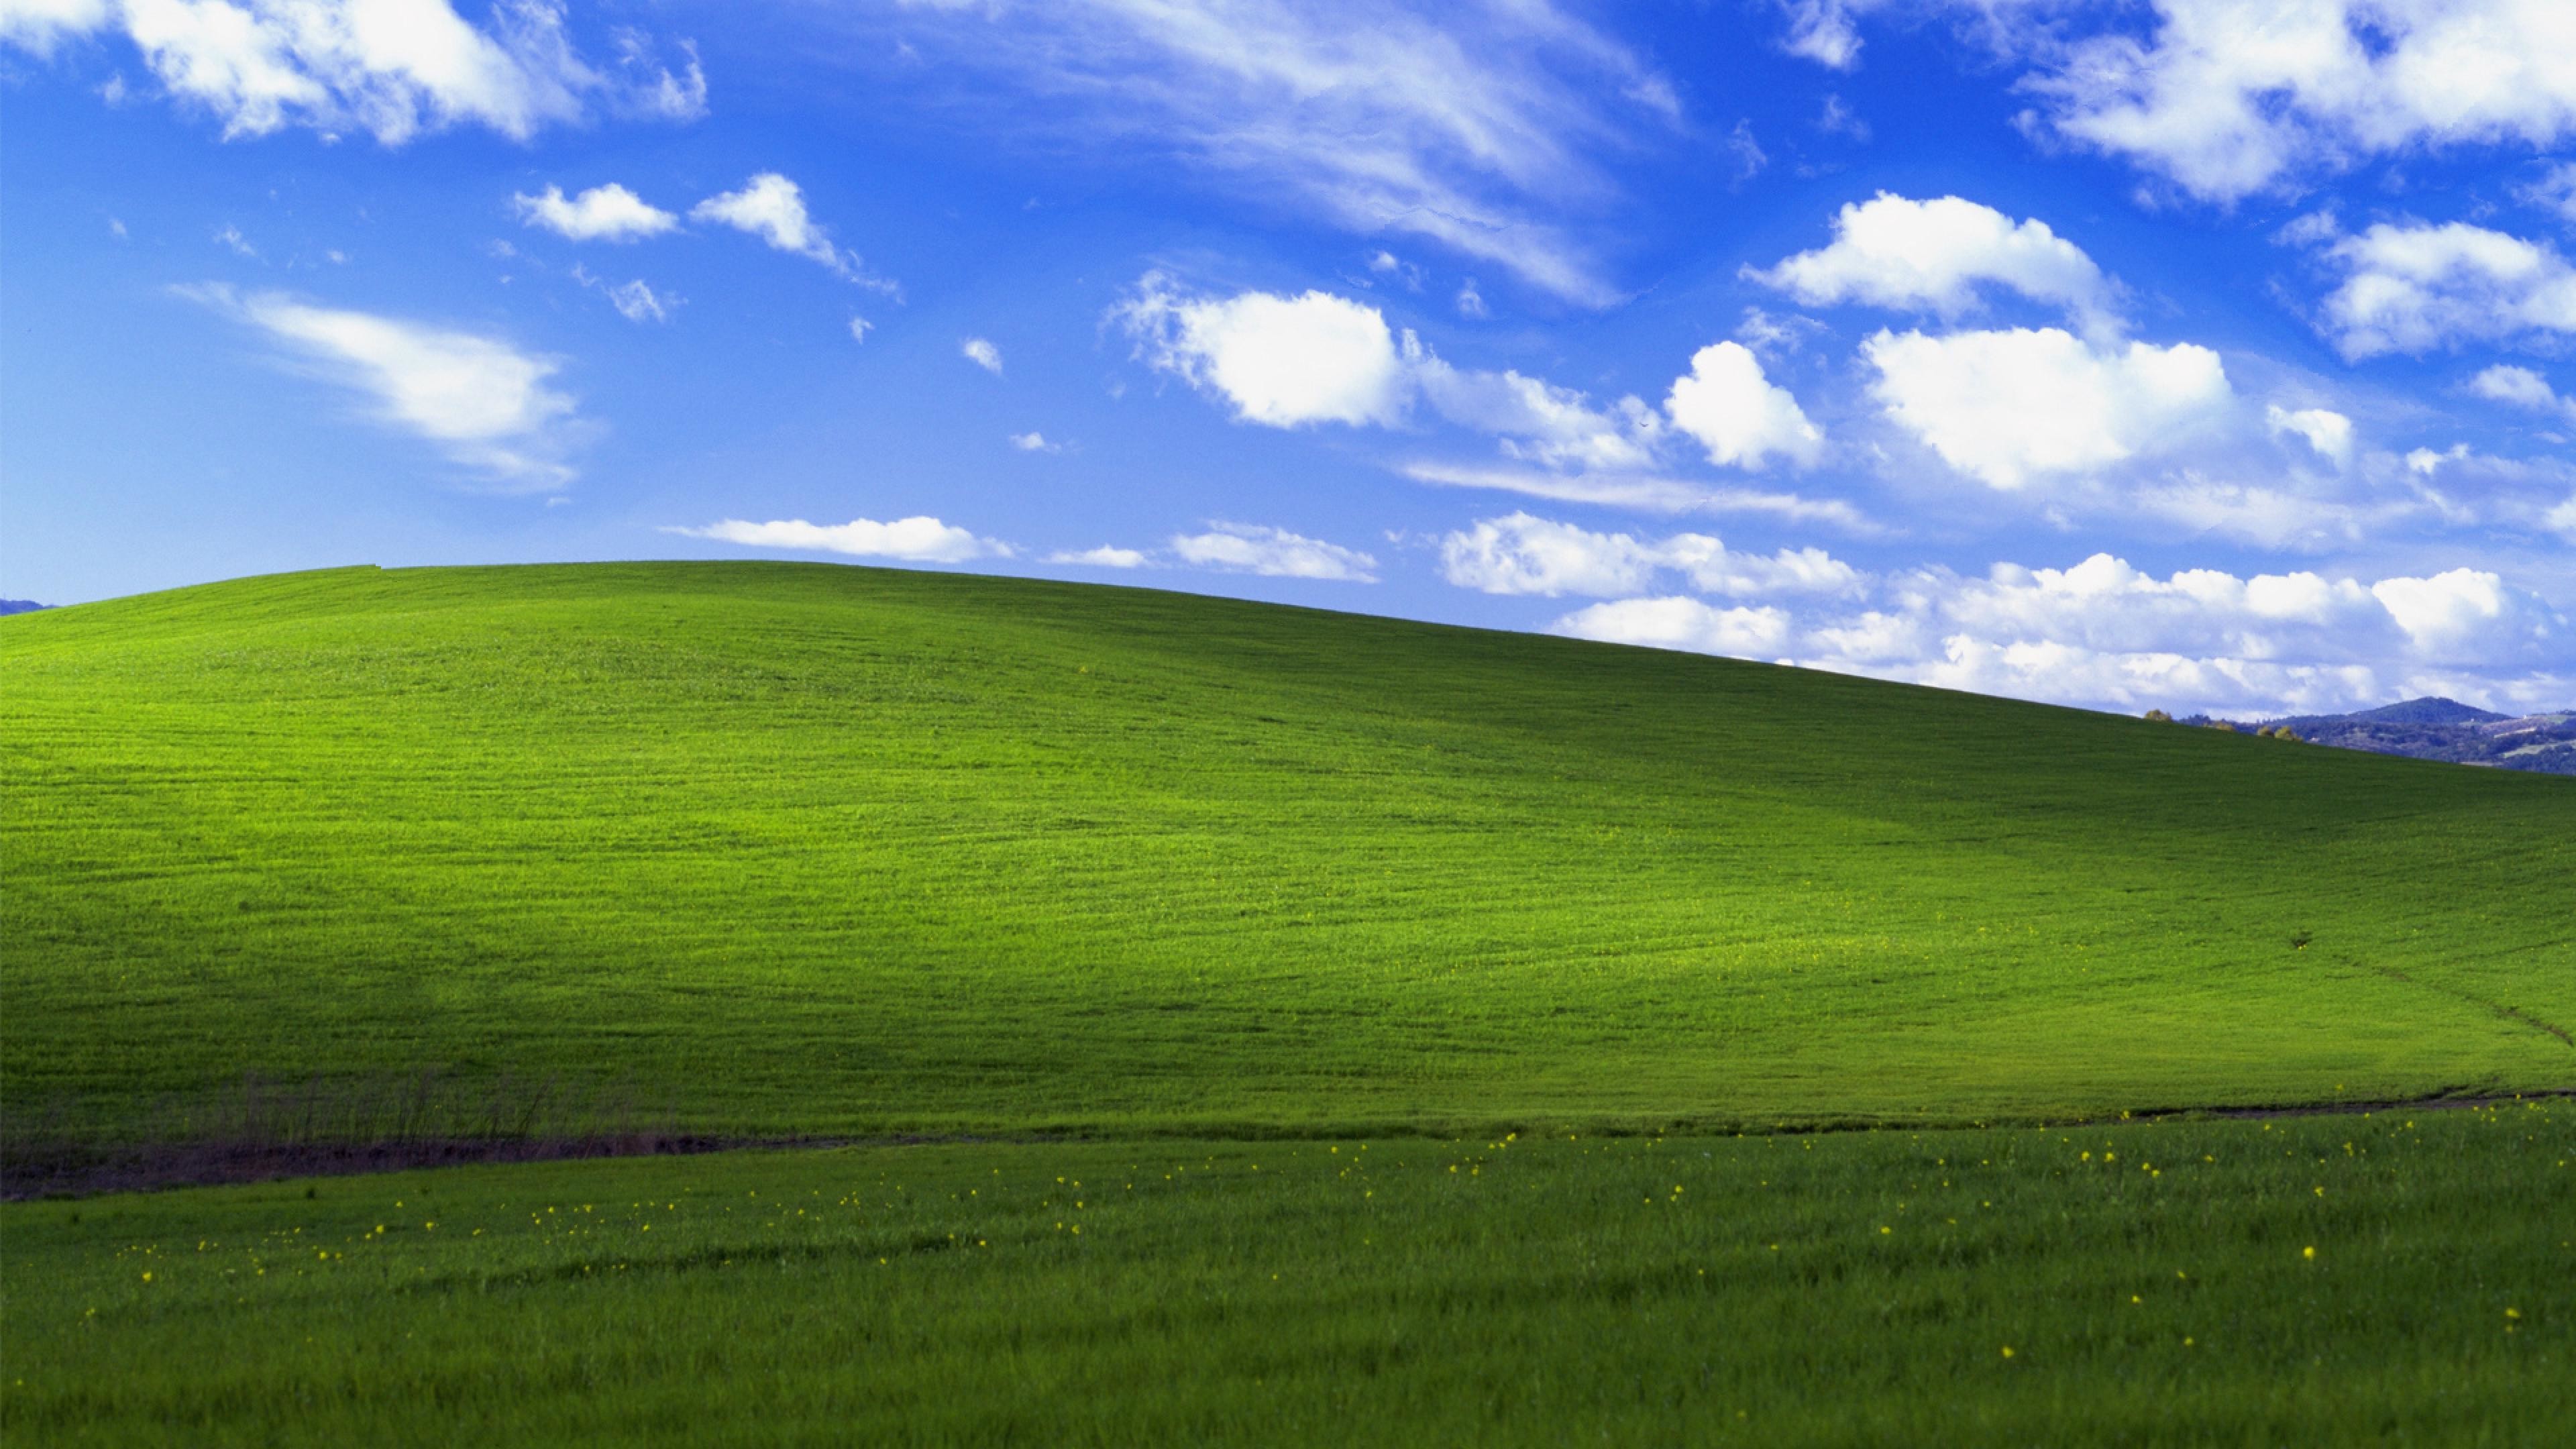 Windows 95 4k wallpaper Resolution 3840x2160 | Best Download this awesome wallpaper - Cool Wallpaper HD - CoolWallpaper-HD.com